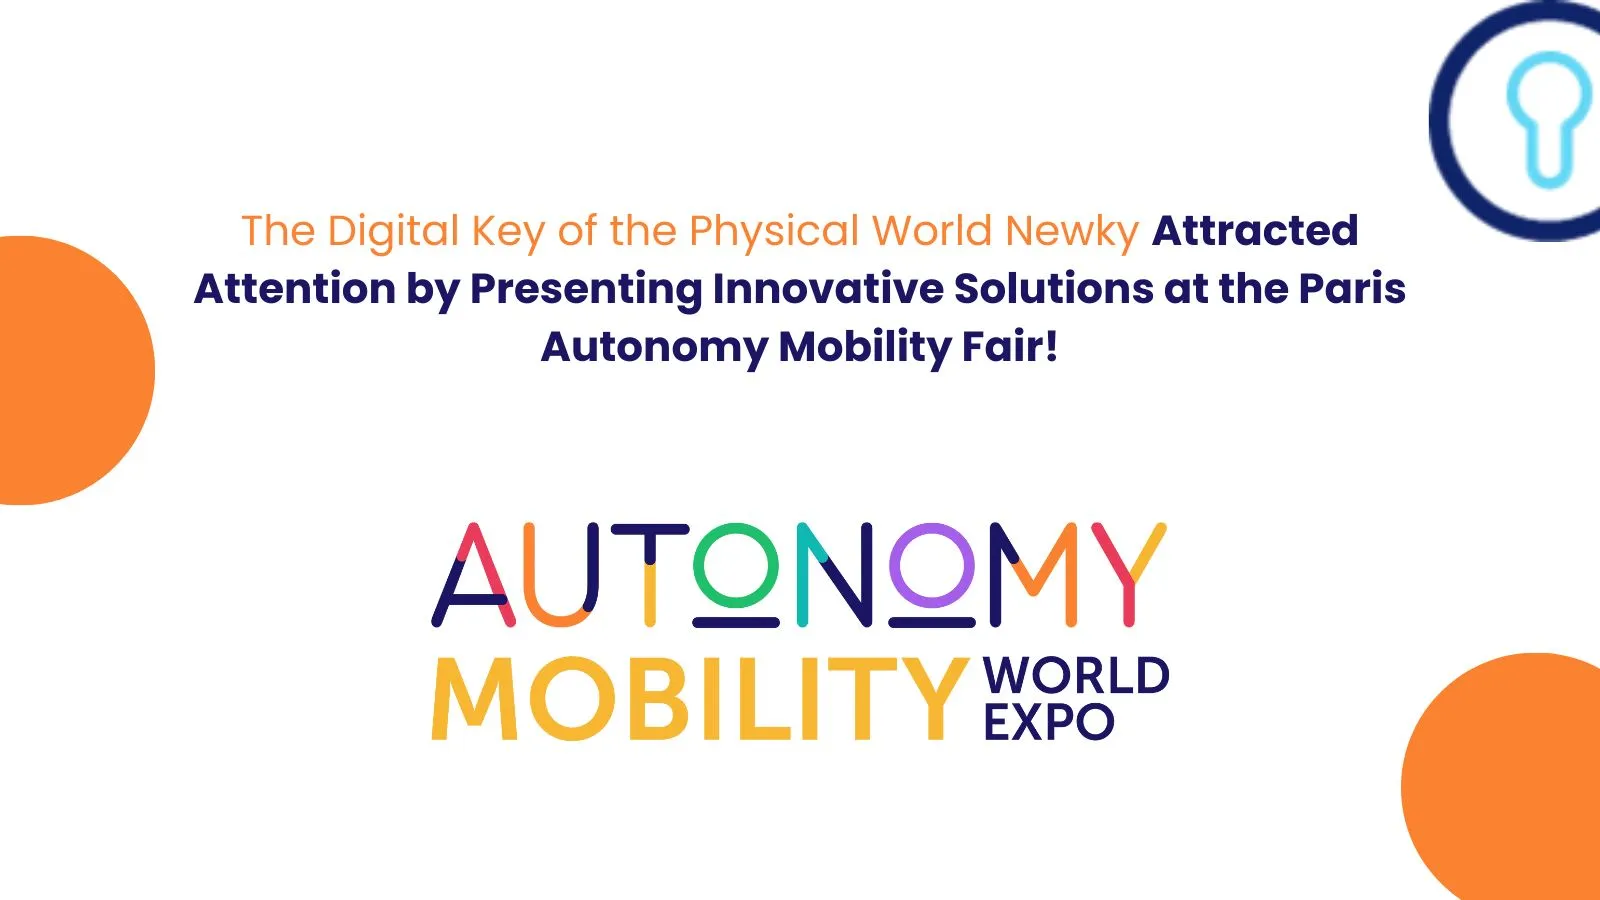 Newky, Attracted Attention by Offering Innovative Solutions at Paris Autonomy Mobility Fair